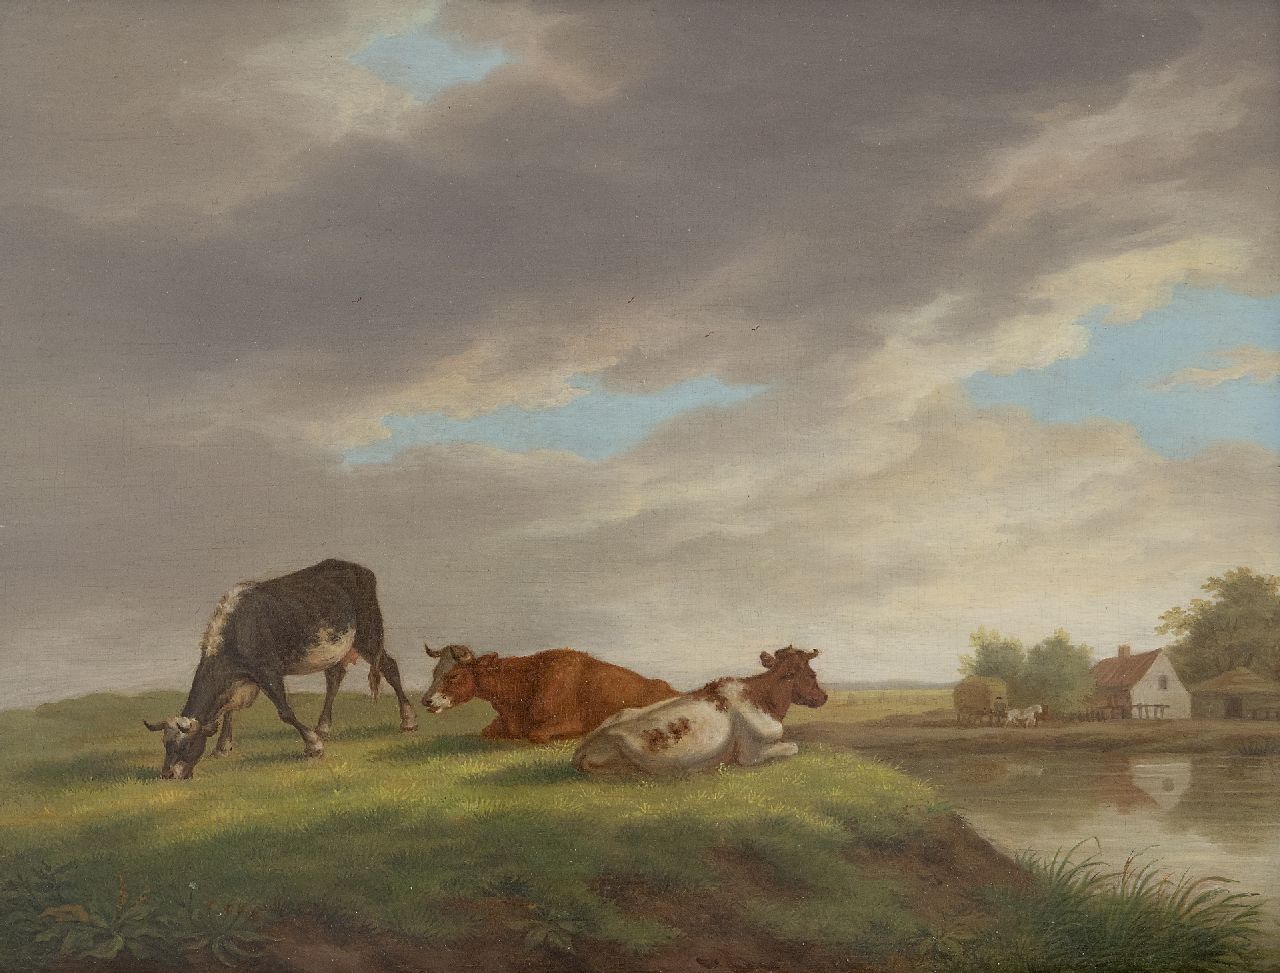 Hendrik Adam van der Burgh | Cows in a landscape with a farm, oil on panel, 20.4 x 26.3 cm, signed l.l. and painted 1821